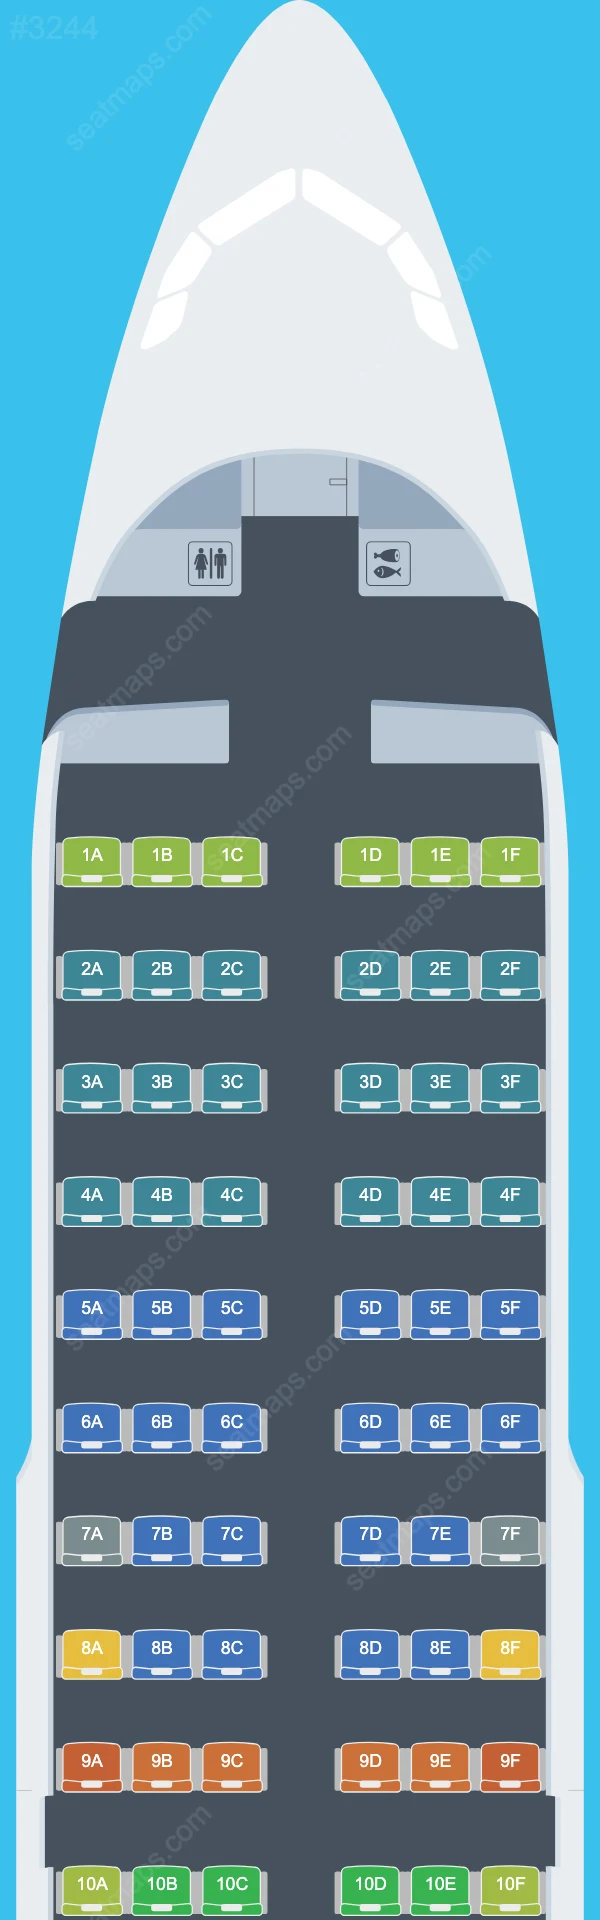 Vueling Airbus A319 Seat Maps A319-100